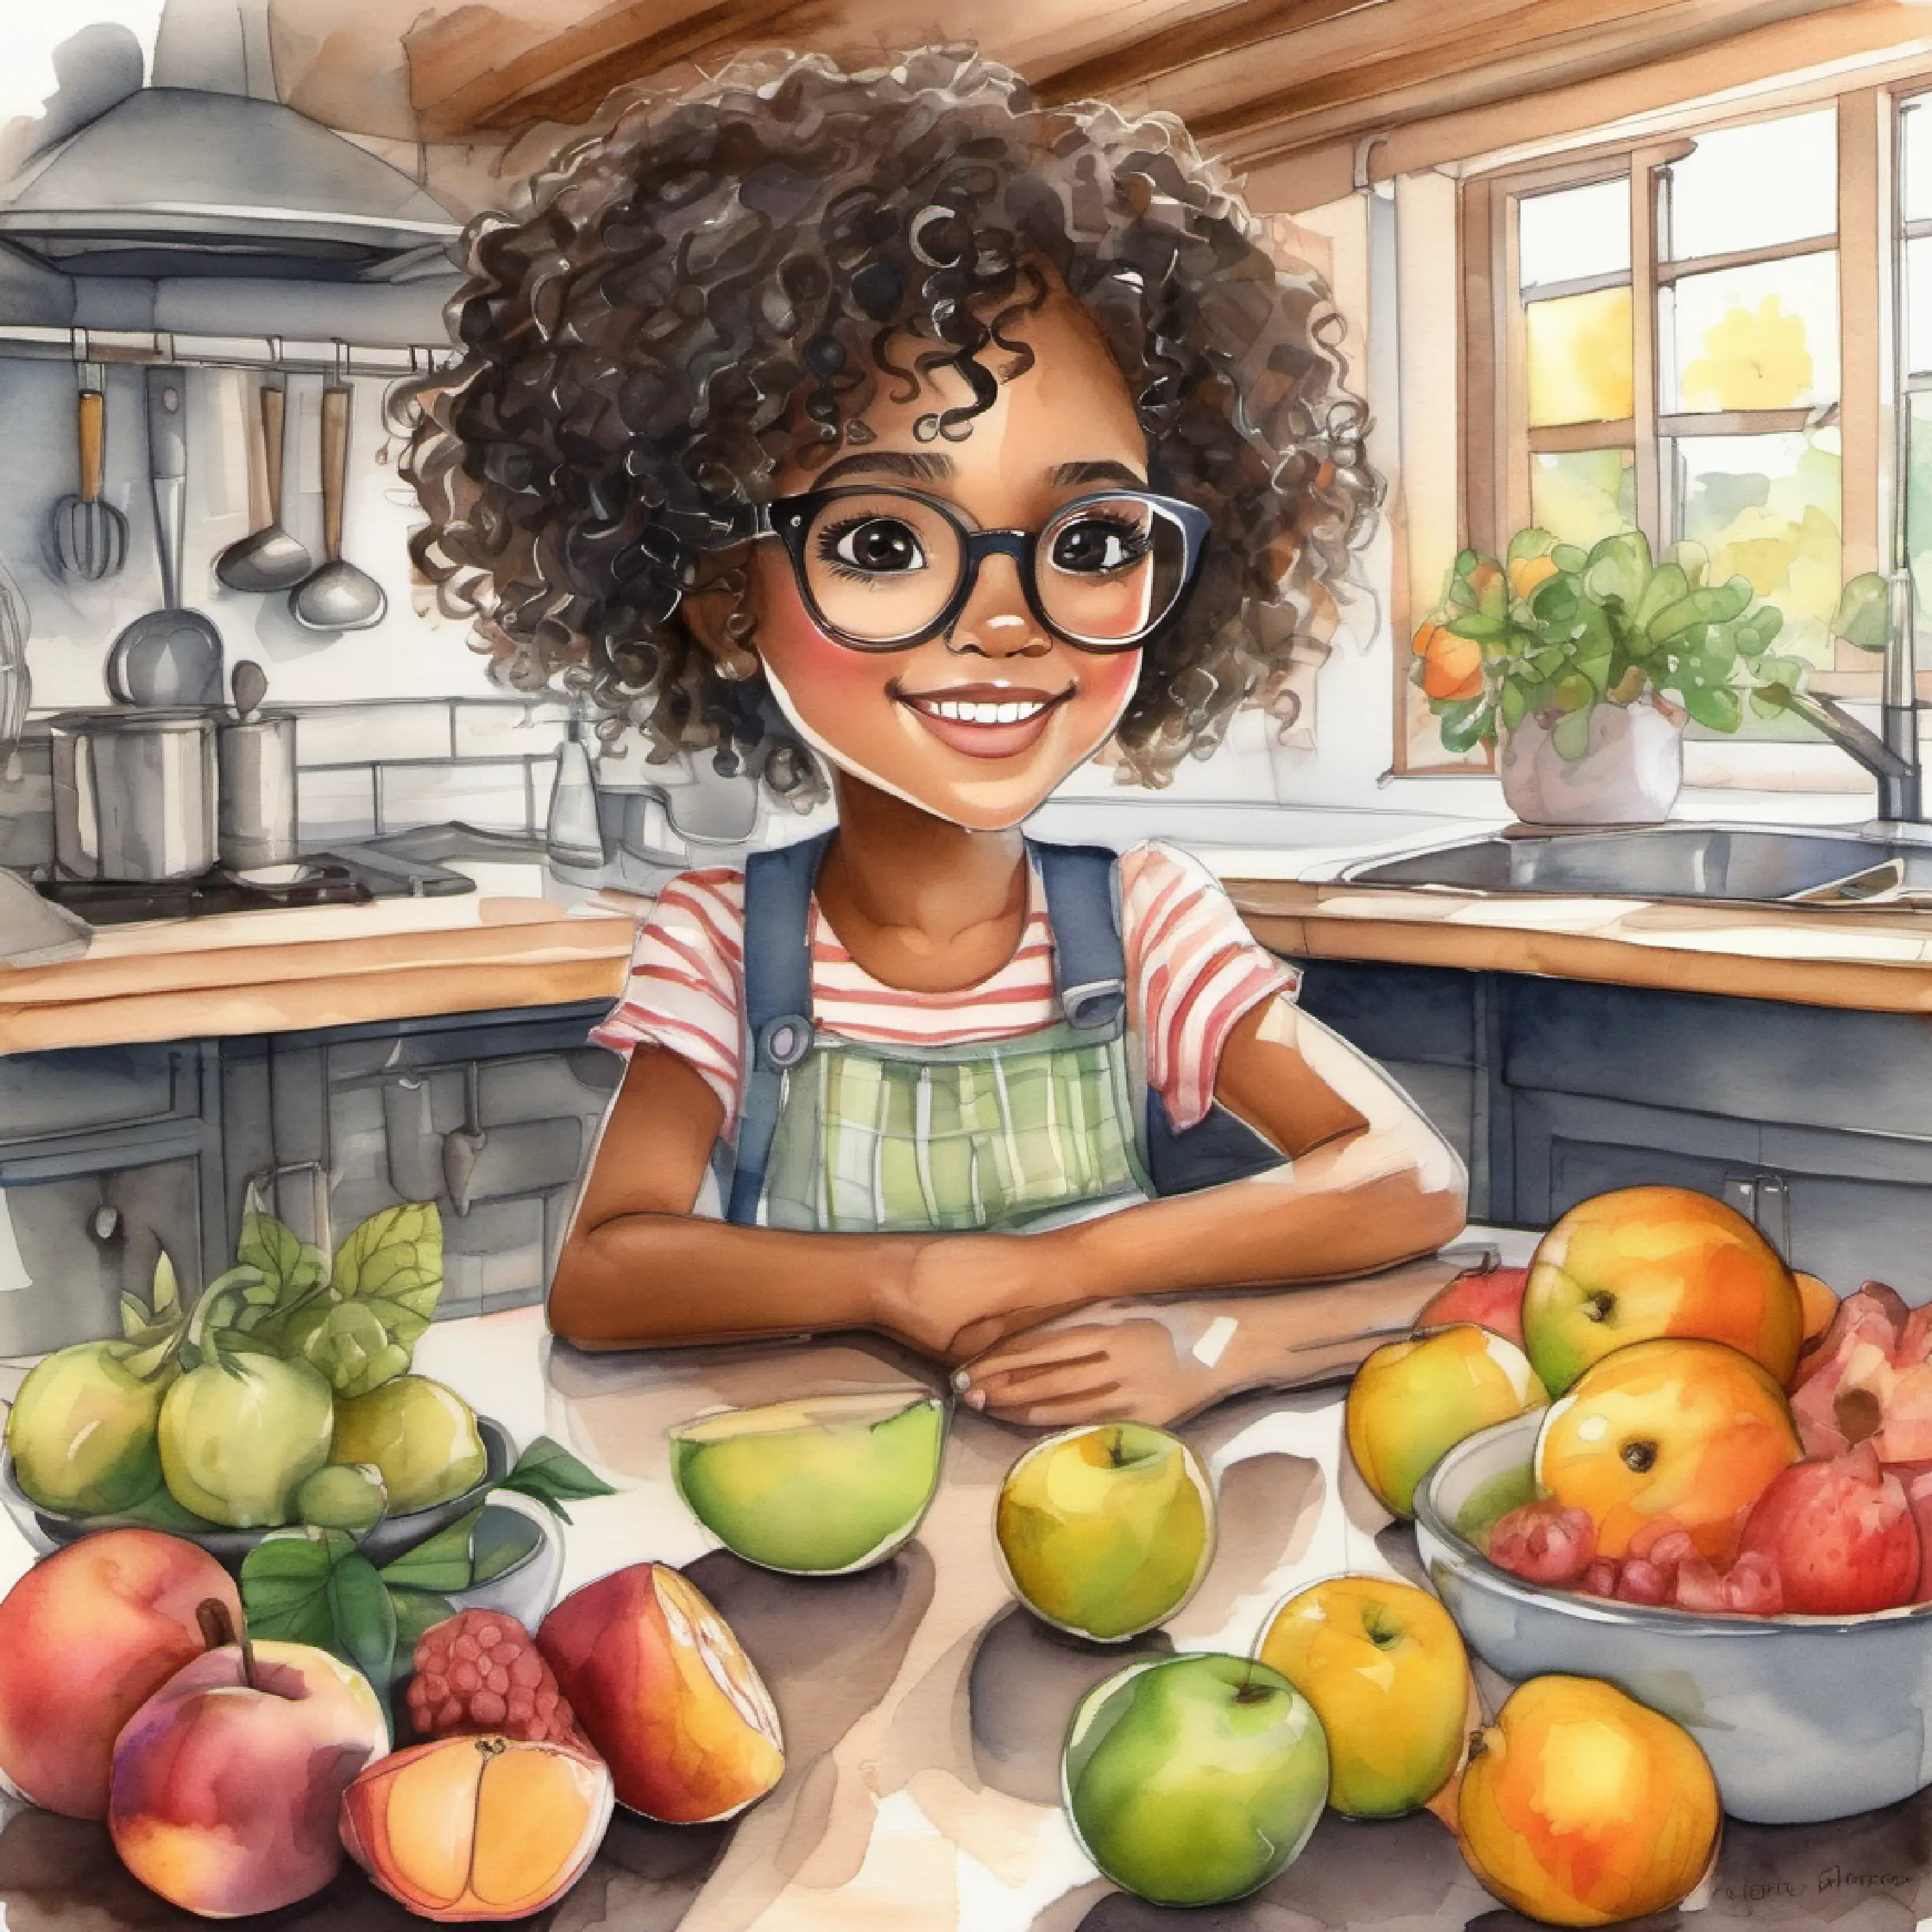 Caring figure, light skin, straight brown hair, glasses in the kitchen with fruits, asking Cheerful girl, brown skin, curly black hair, big brown eyes.